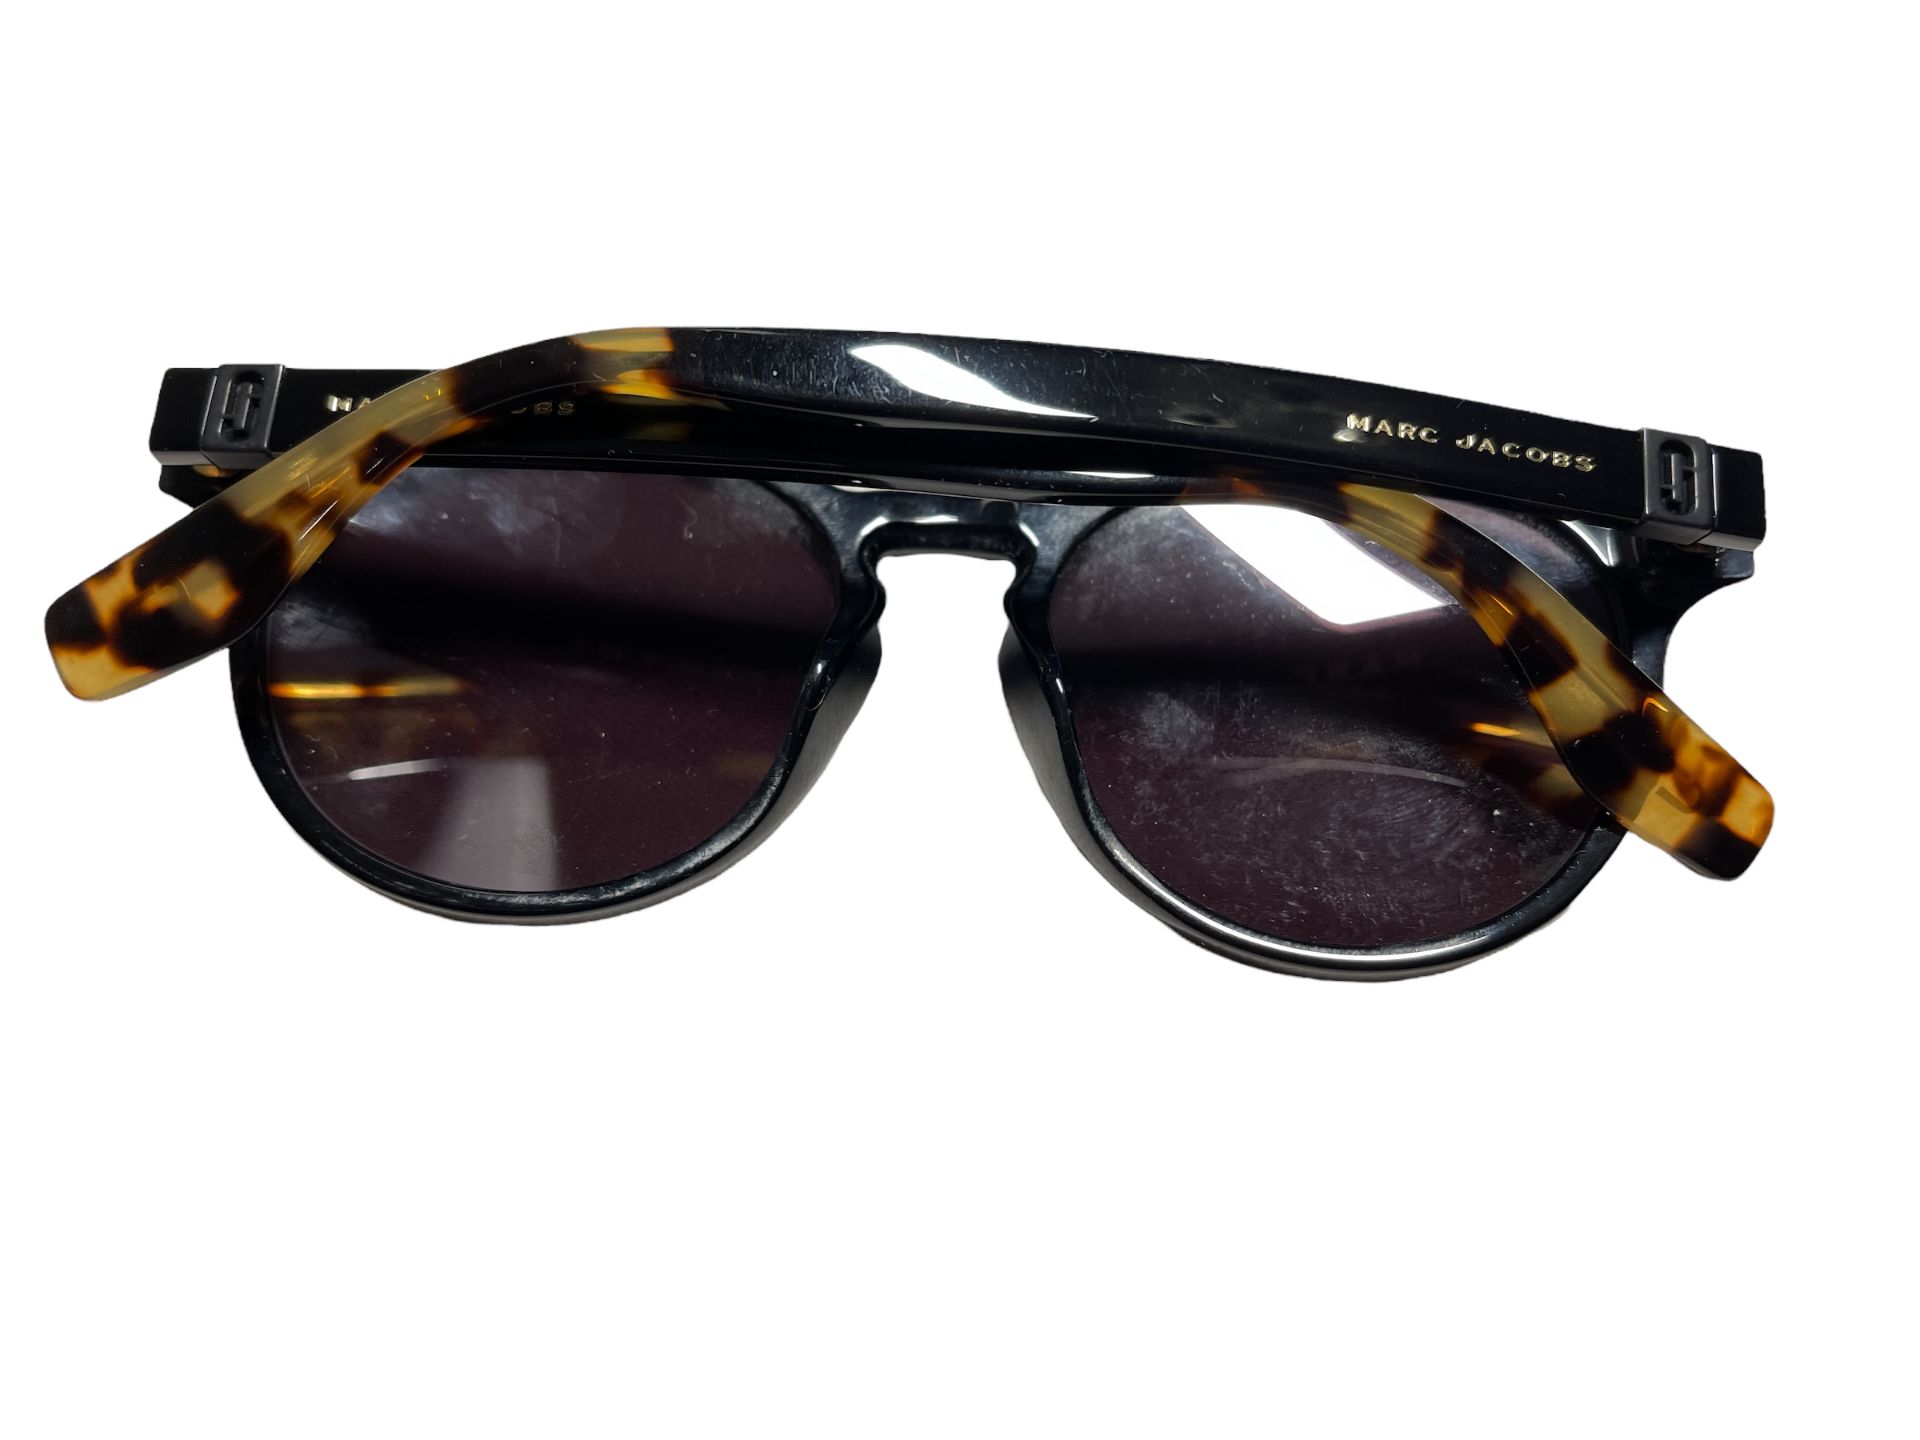 Marc Jacobs Ladies Sunglasses - Ex Demo or Surplus Stock from our Private Jet Charter - Image 7 of 10